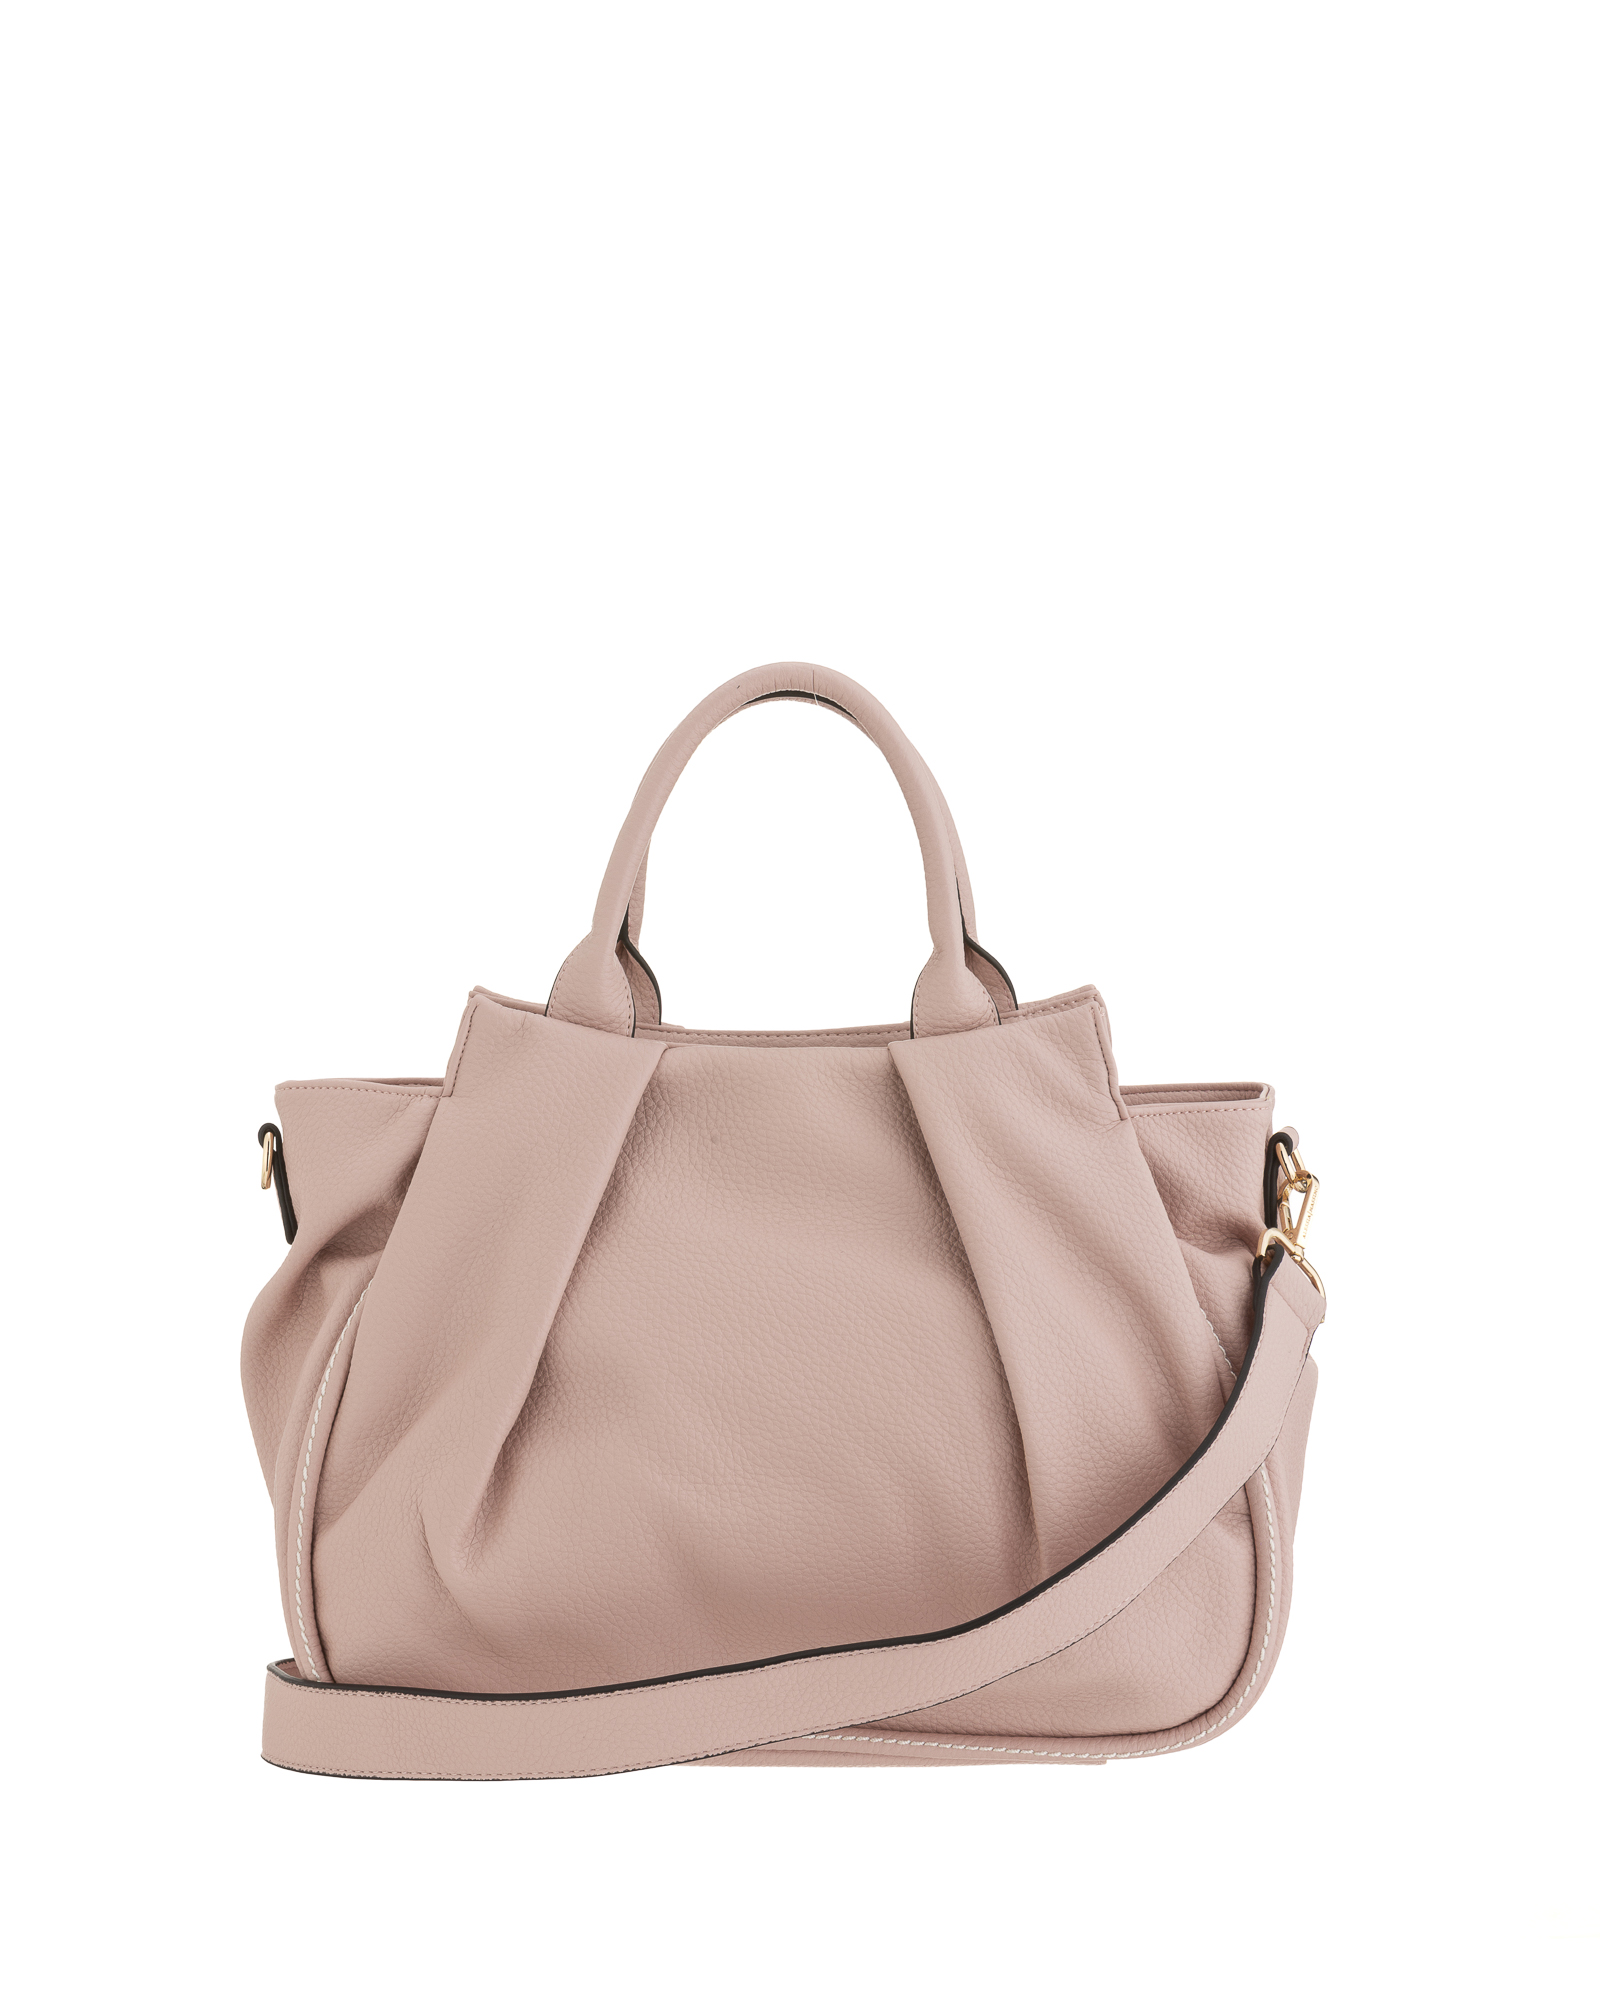 BAG PINK - STYLE1737